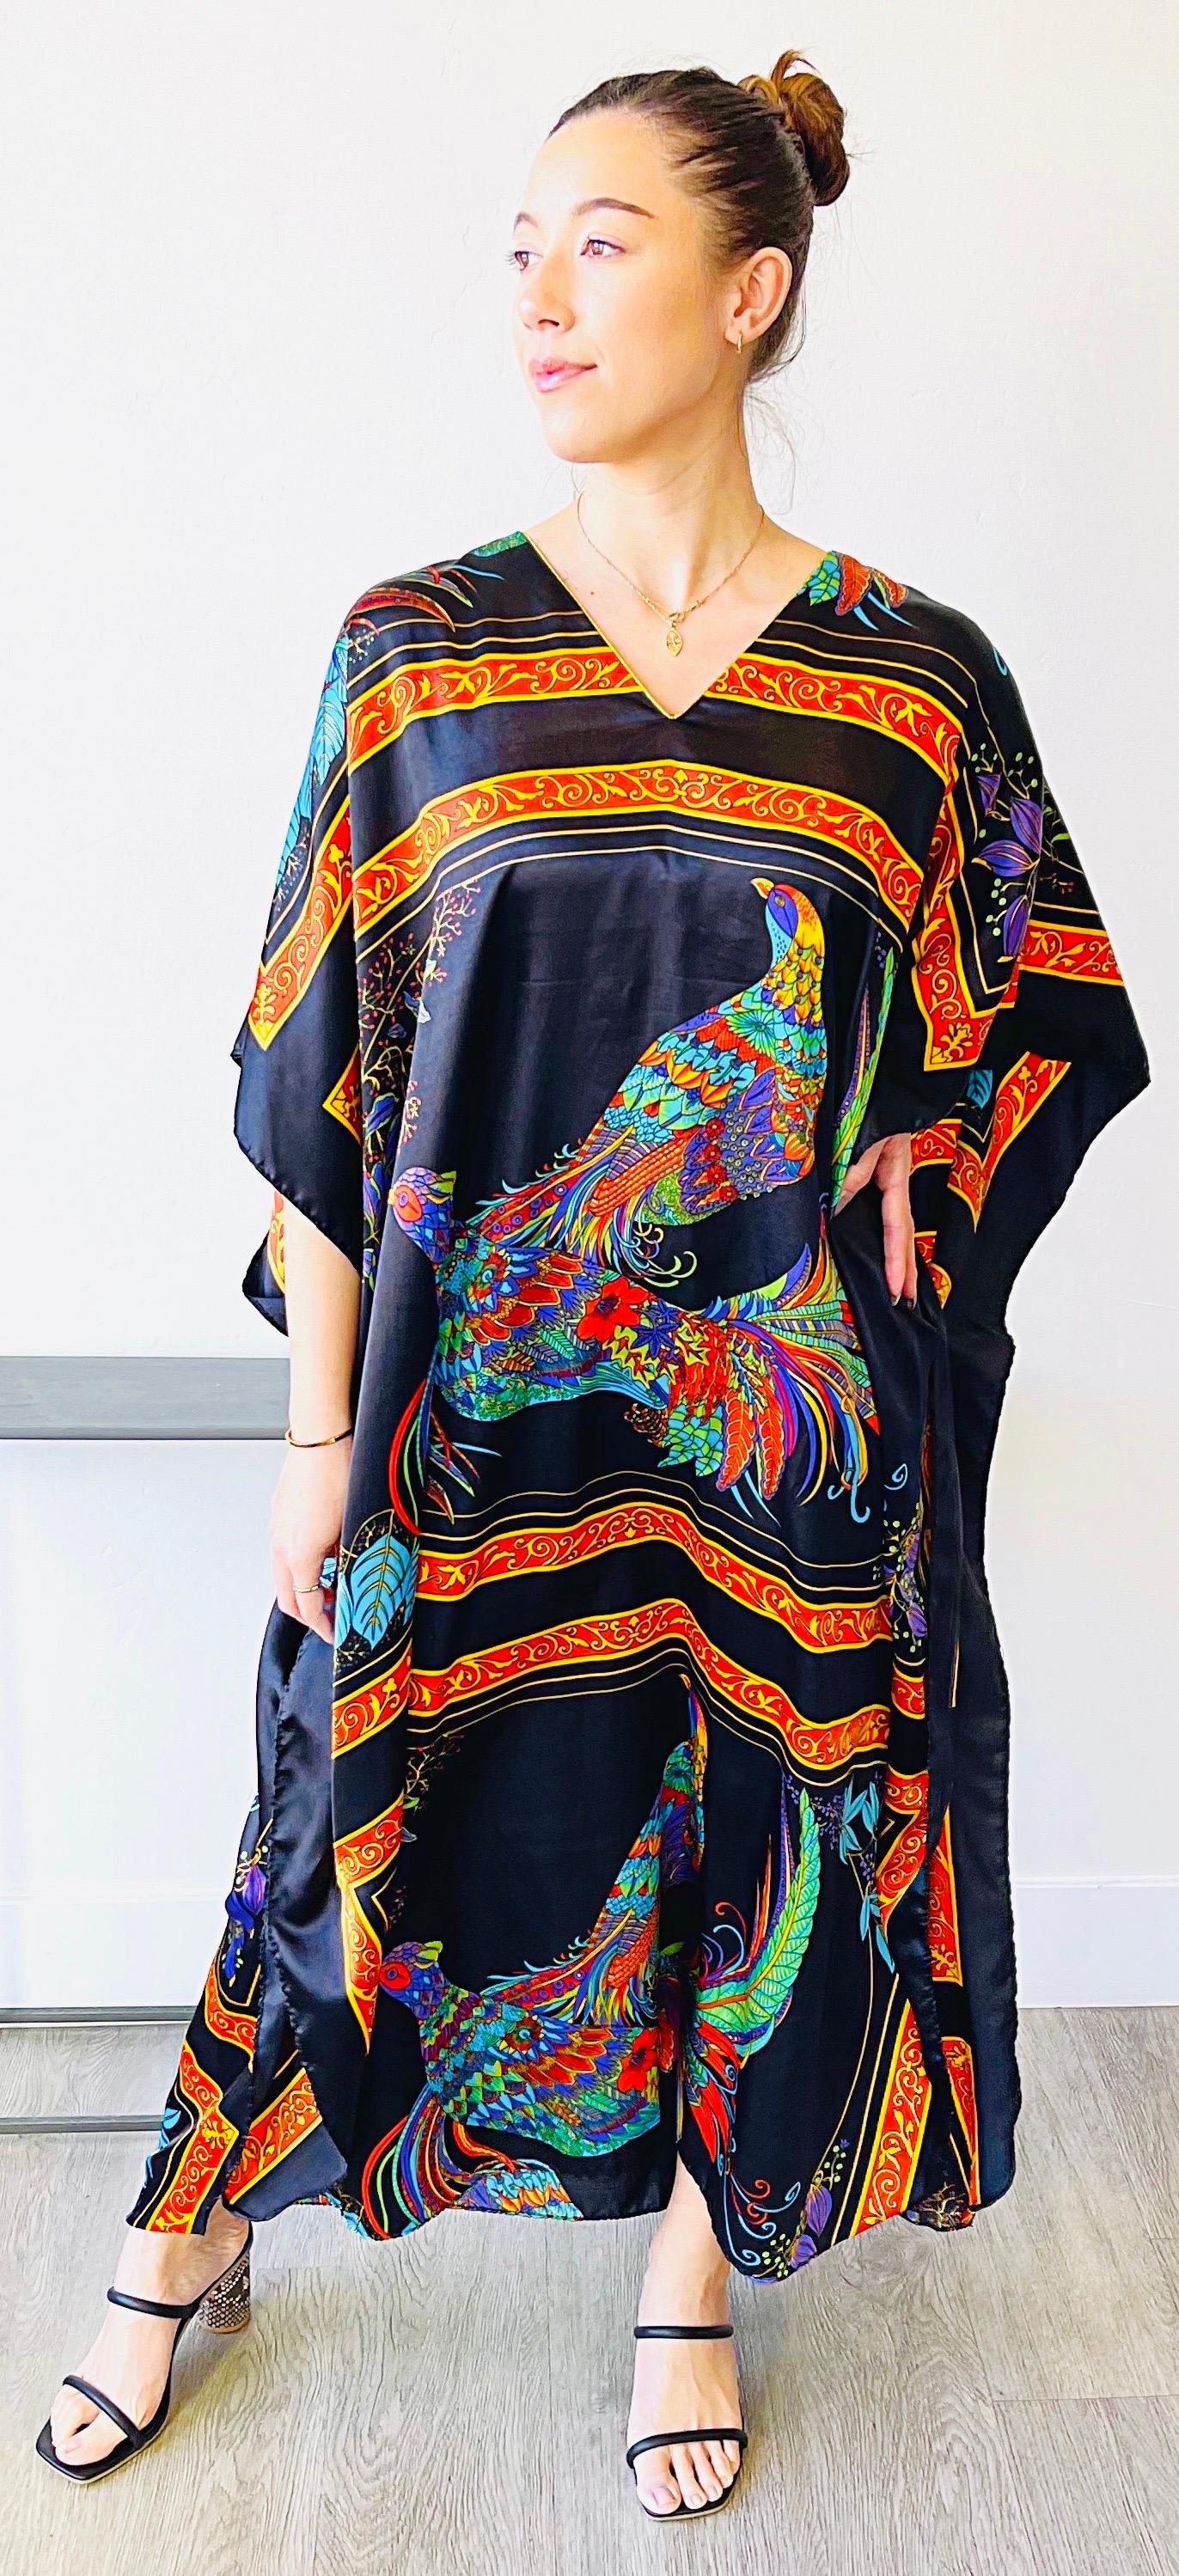 Amazing Vintage Pheasant Bird Novelty Print Caftan Maxi Dress Colorful Kaftan In Excellent Condition For Sale In San Diego, CA